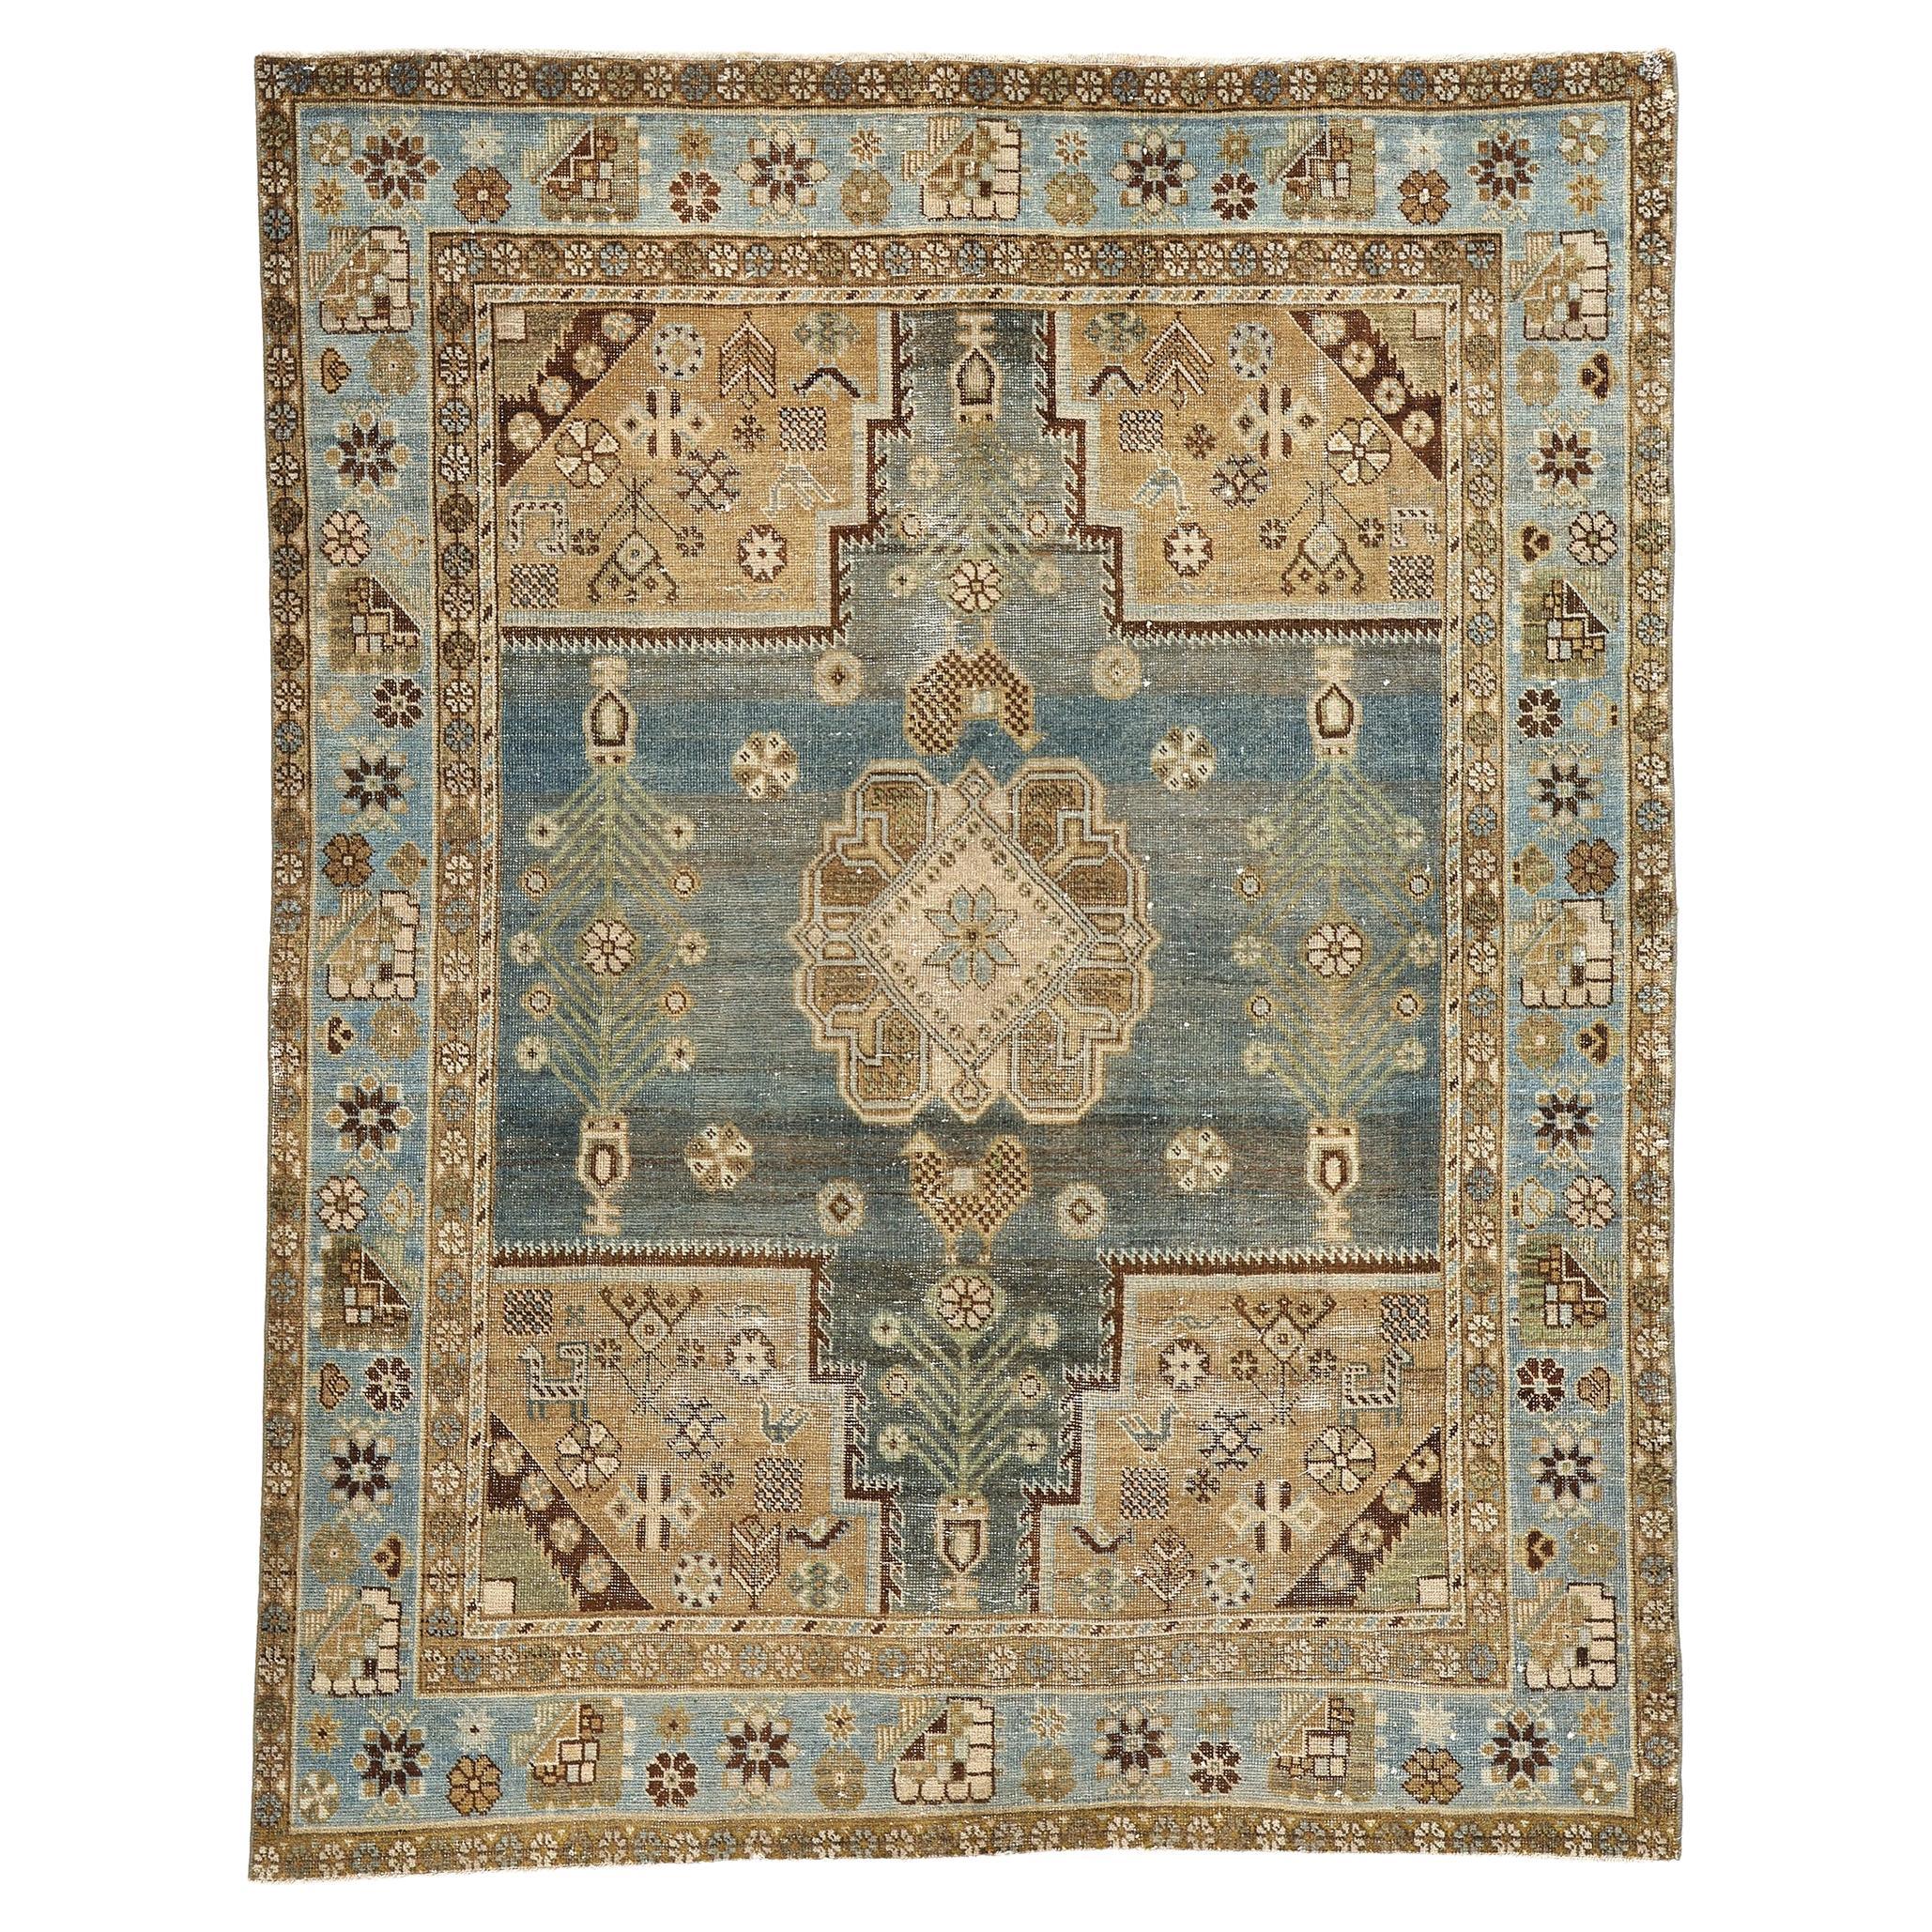 Distressed Antique Persian Afshar Rug